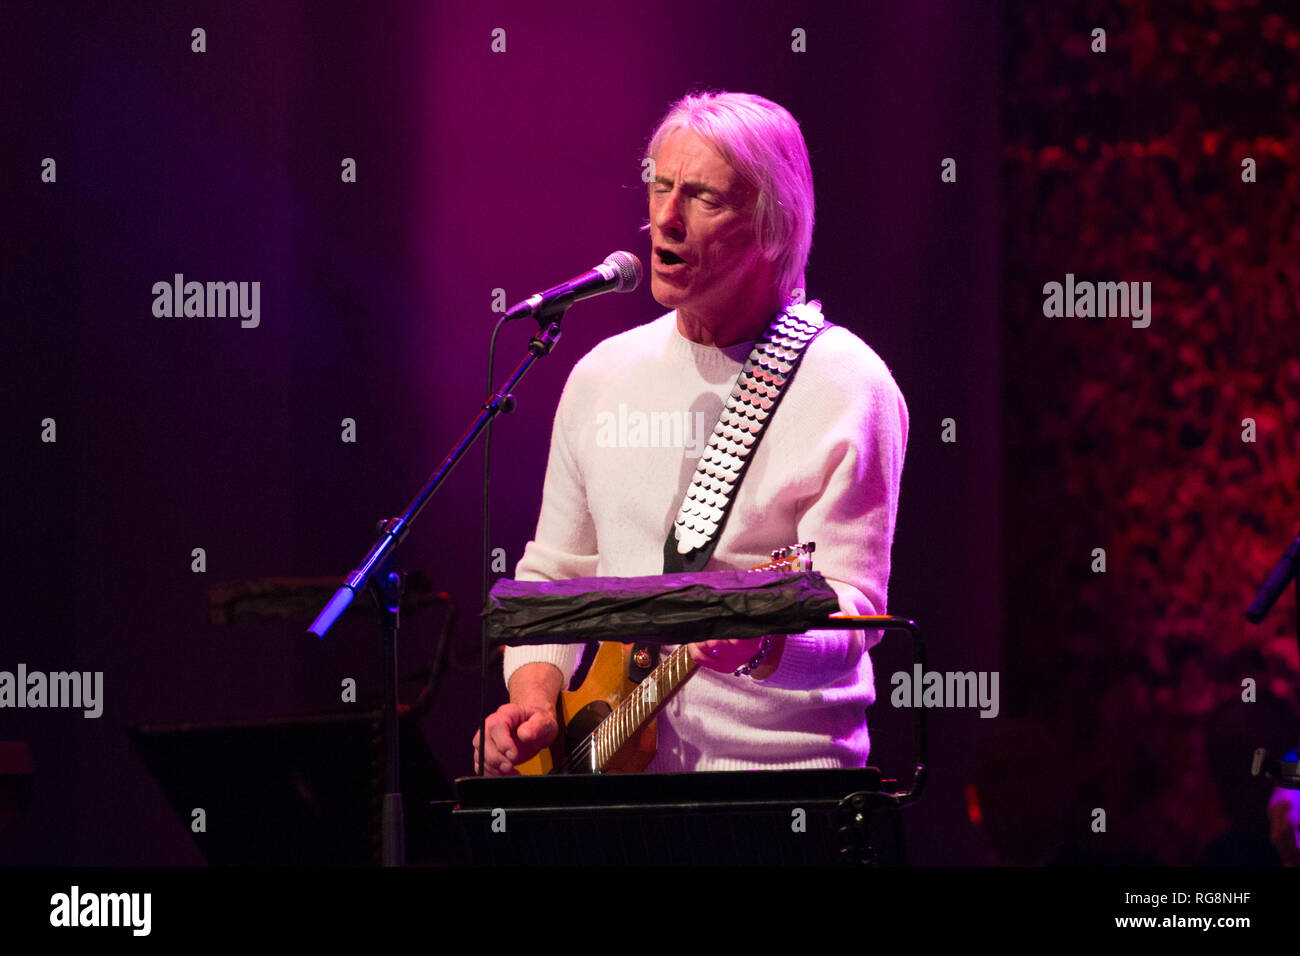 Glasgow, Scotland, UK. 27th Jan, 2019. Paul Weller, English musician, performed at Grace and Danger concert for John Martyn, Celtic Connections 2019, Glasgow, Scotlandd. Credit: Pauline Keightley/Alamy Live News Stock Photo